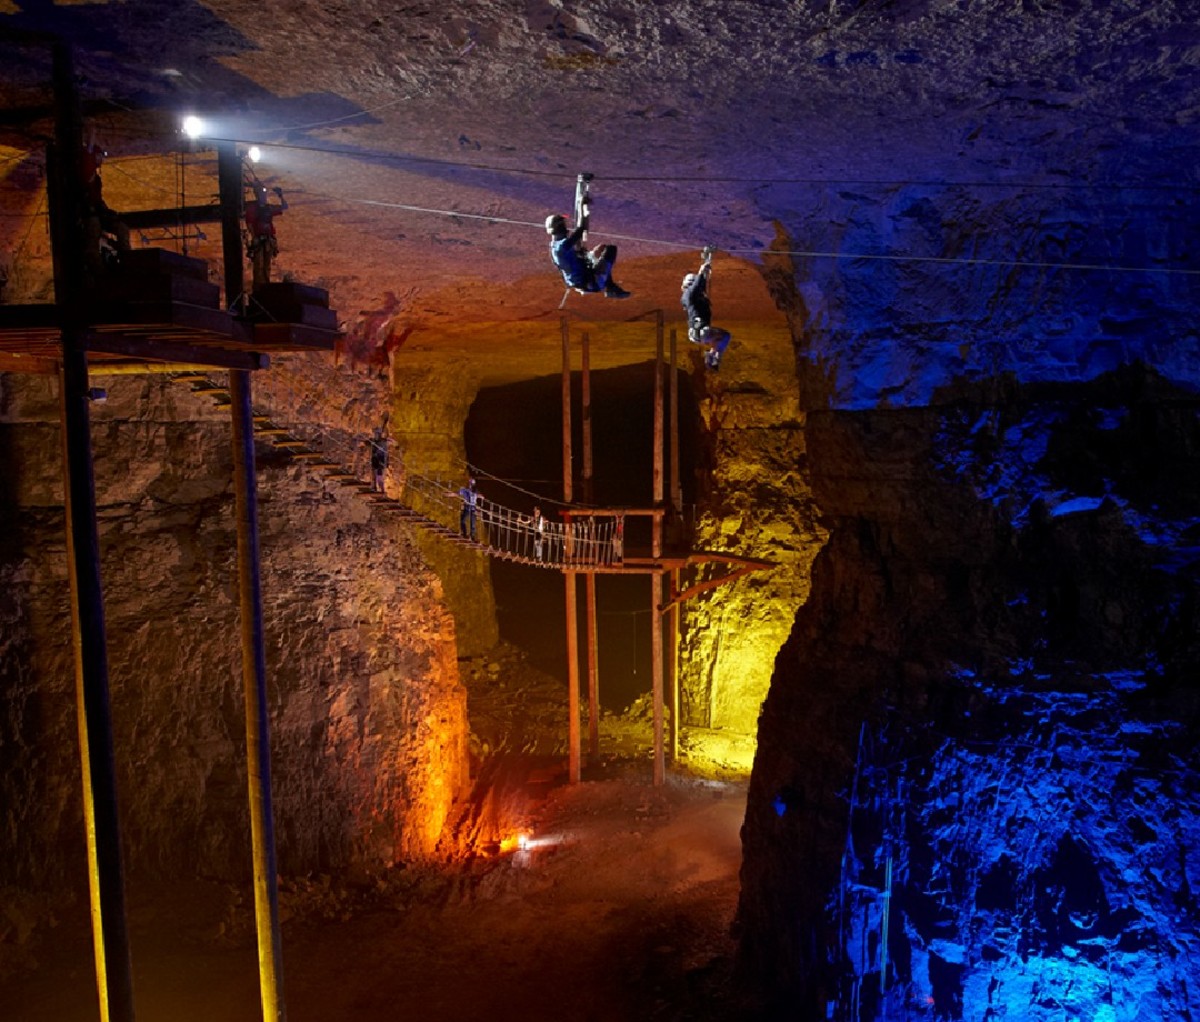 Zip-liners riding the underground zip-line course at Louisville Mega Cavern in Louisville, KY